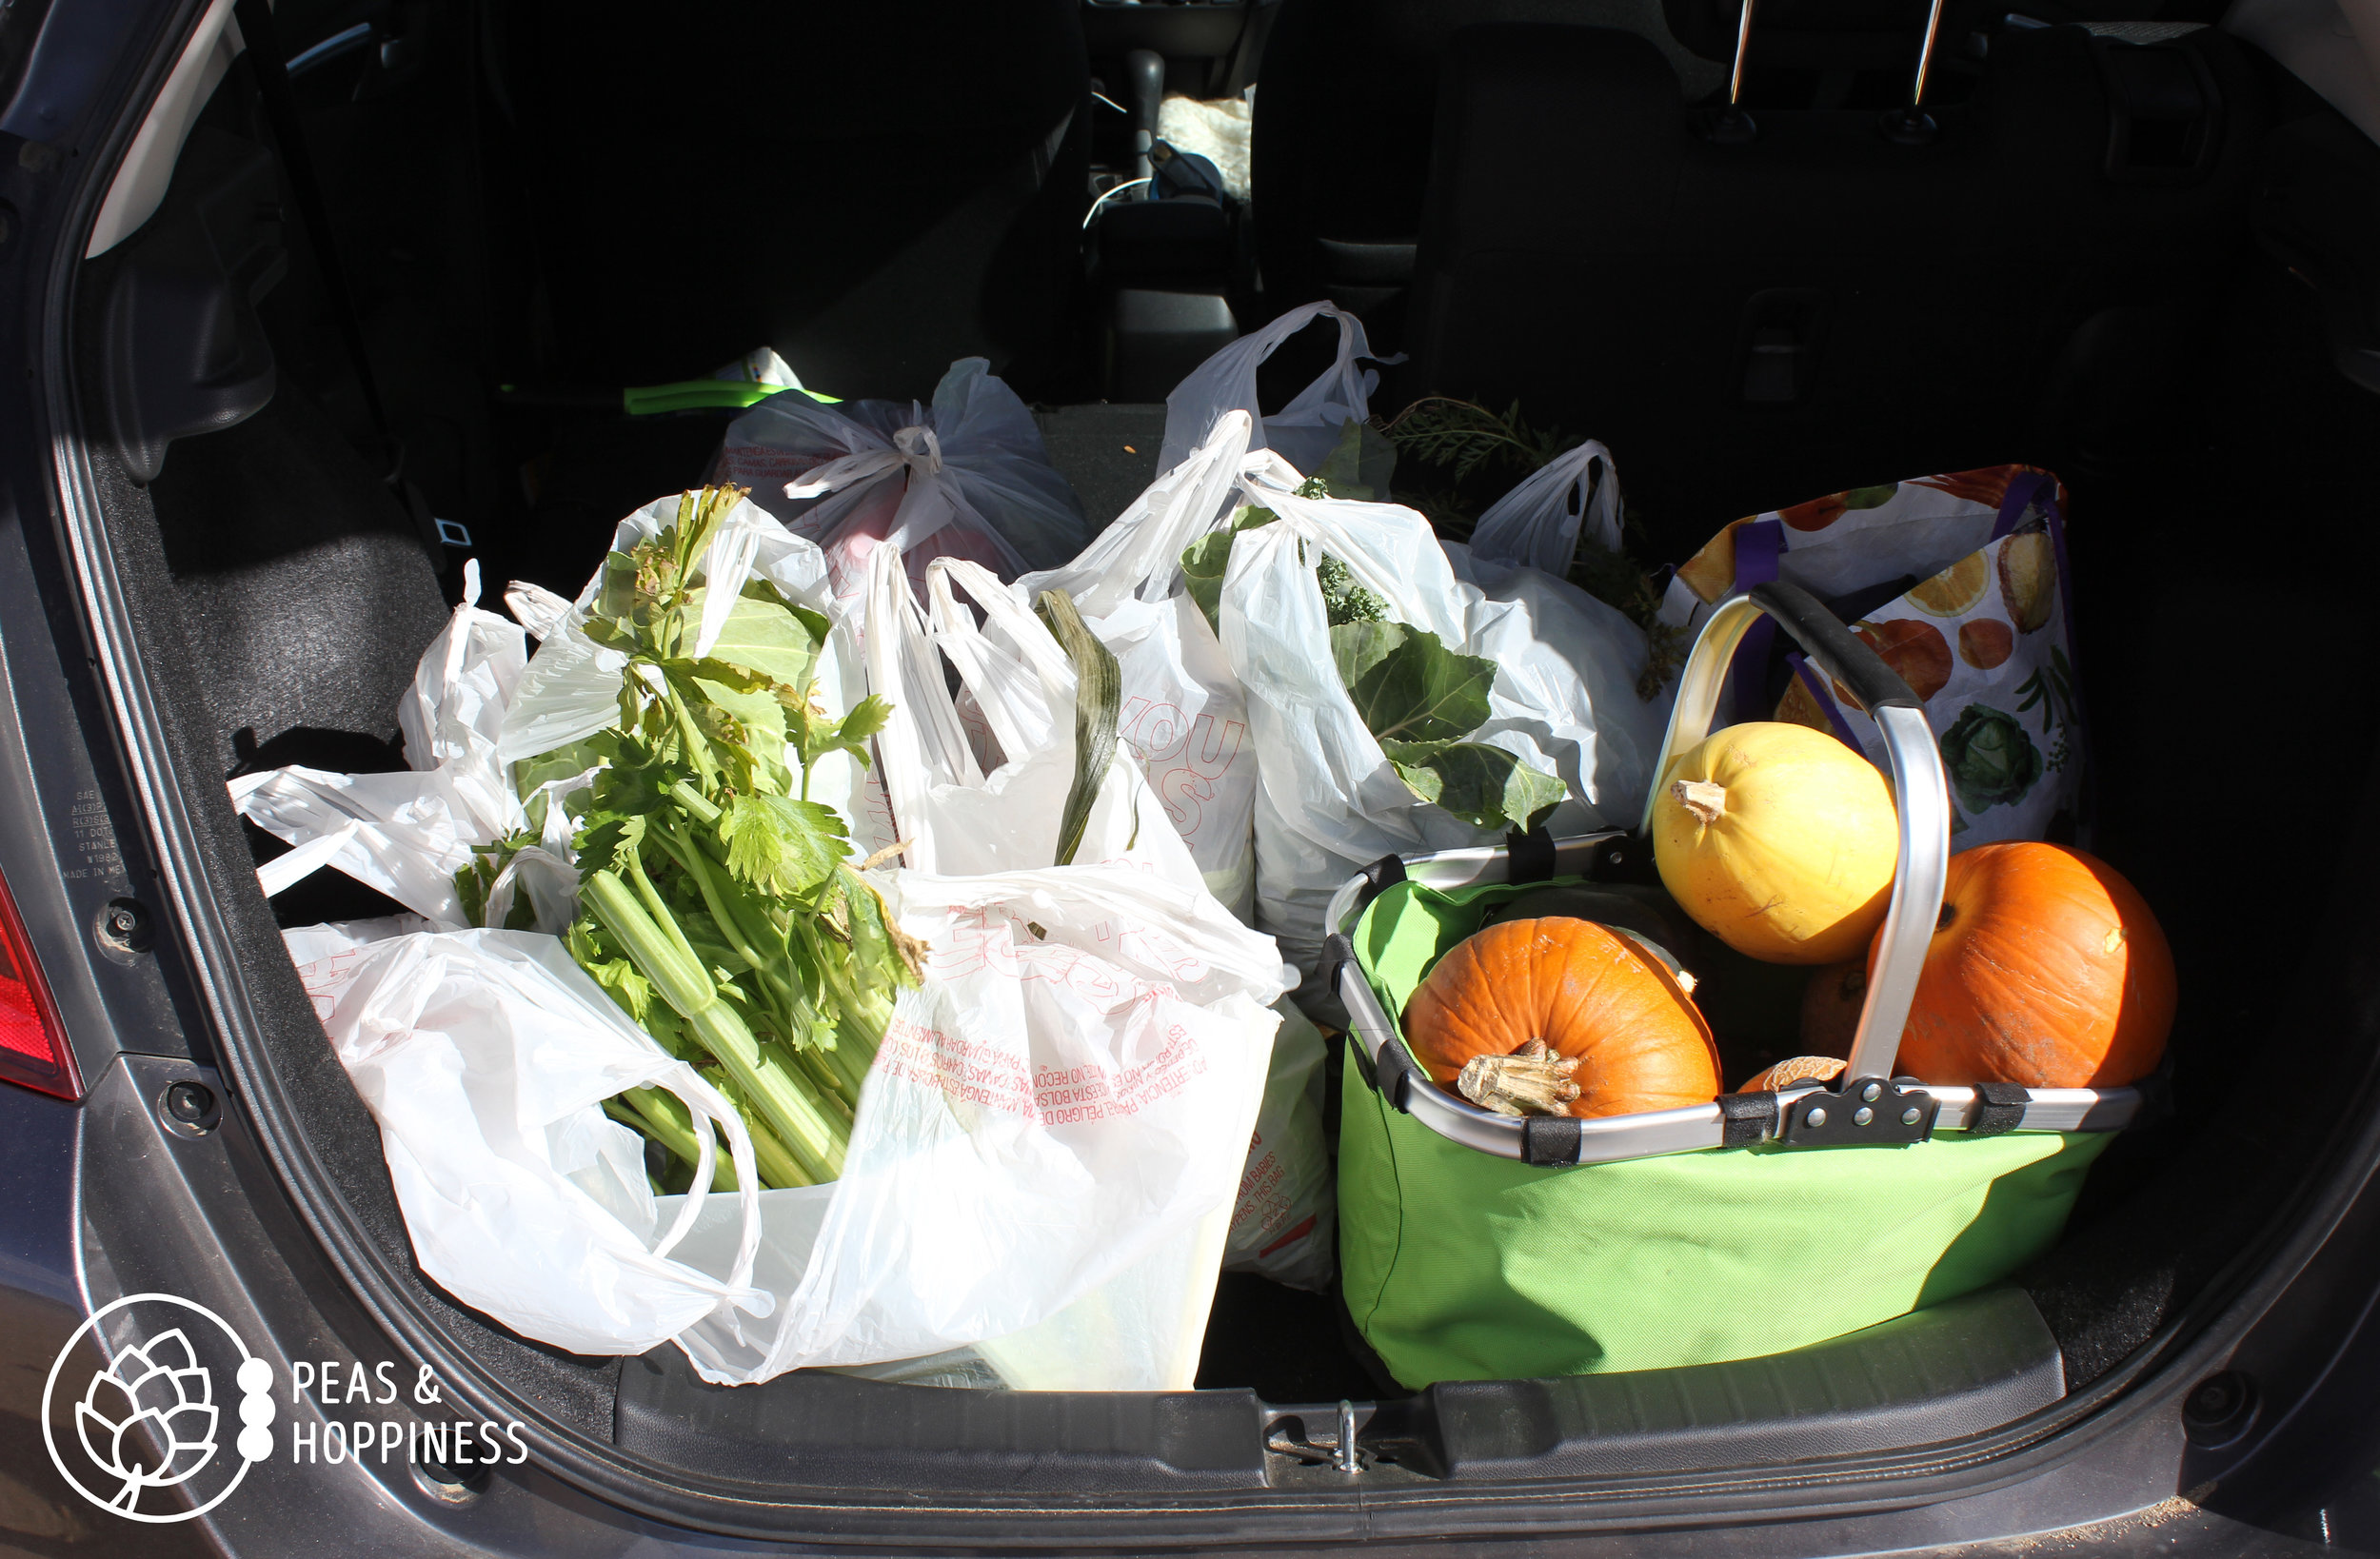 A carload of veggies from last year’s Fall Harvest Festival!